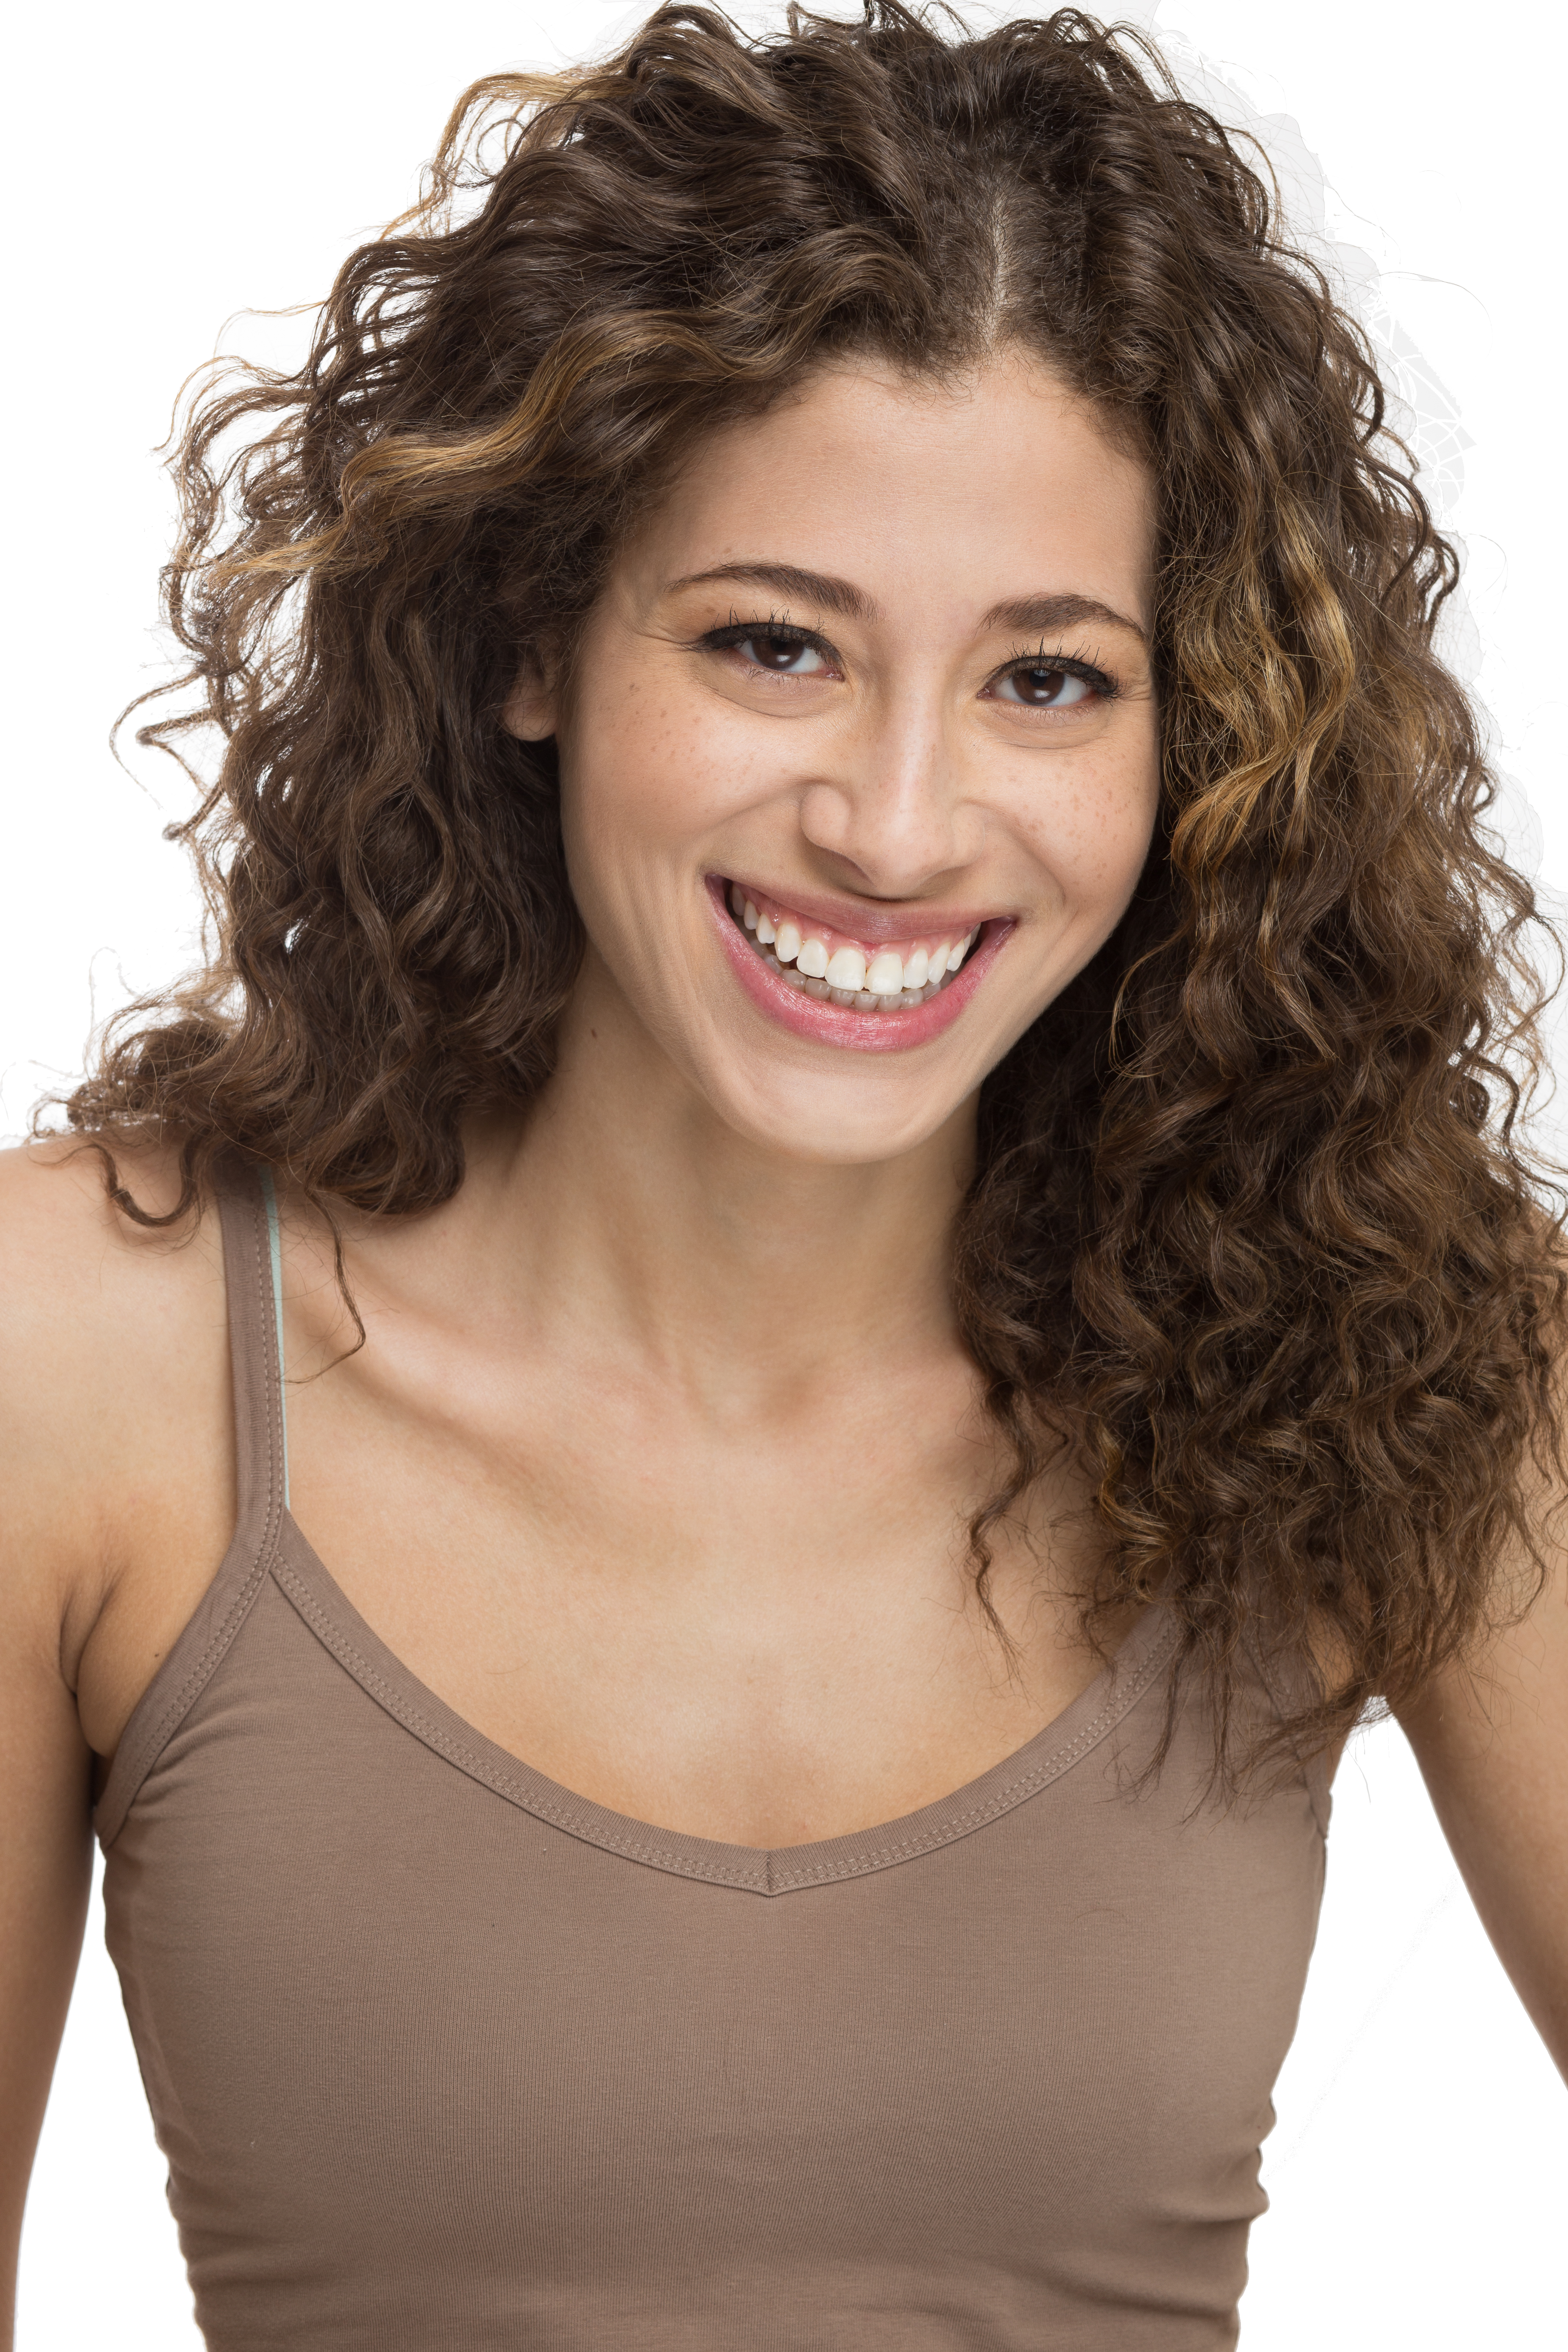 Meaghan Bloom Fluitt - Theatrical/Commercial Headshot with Curly Hair